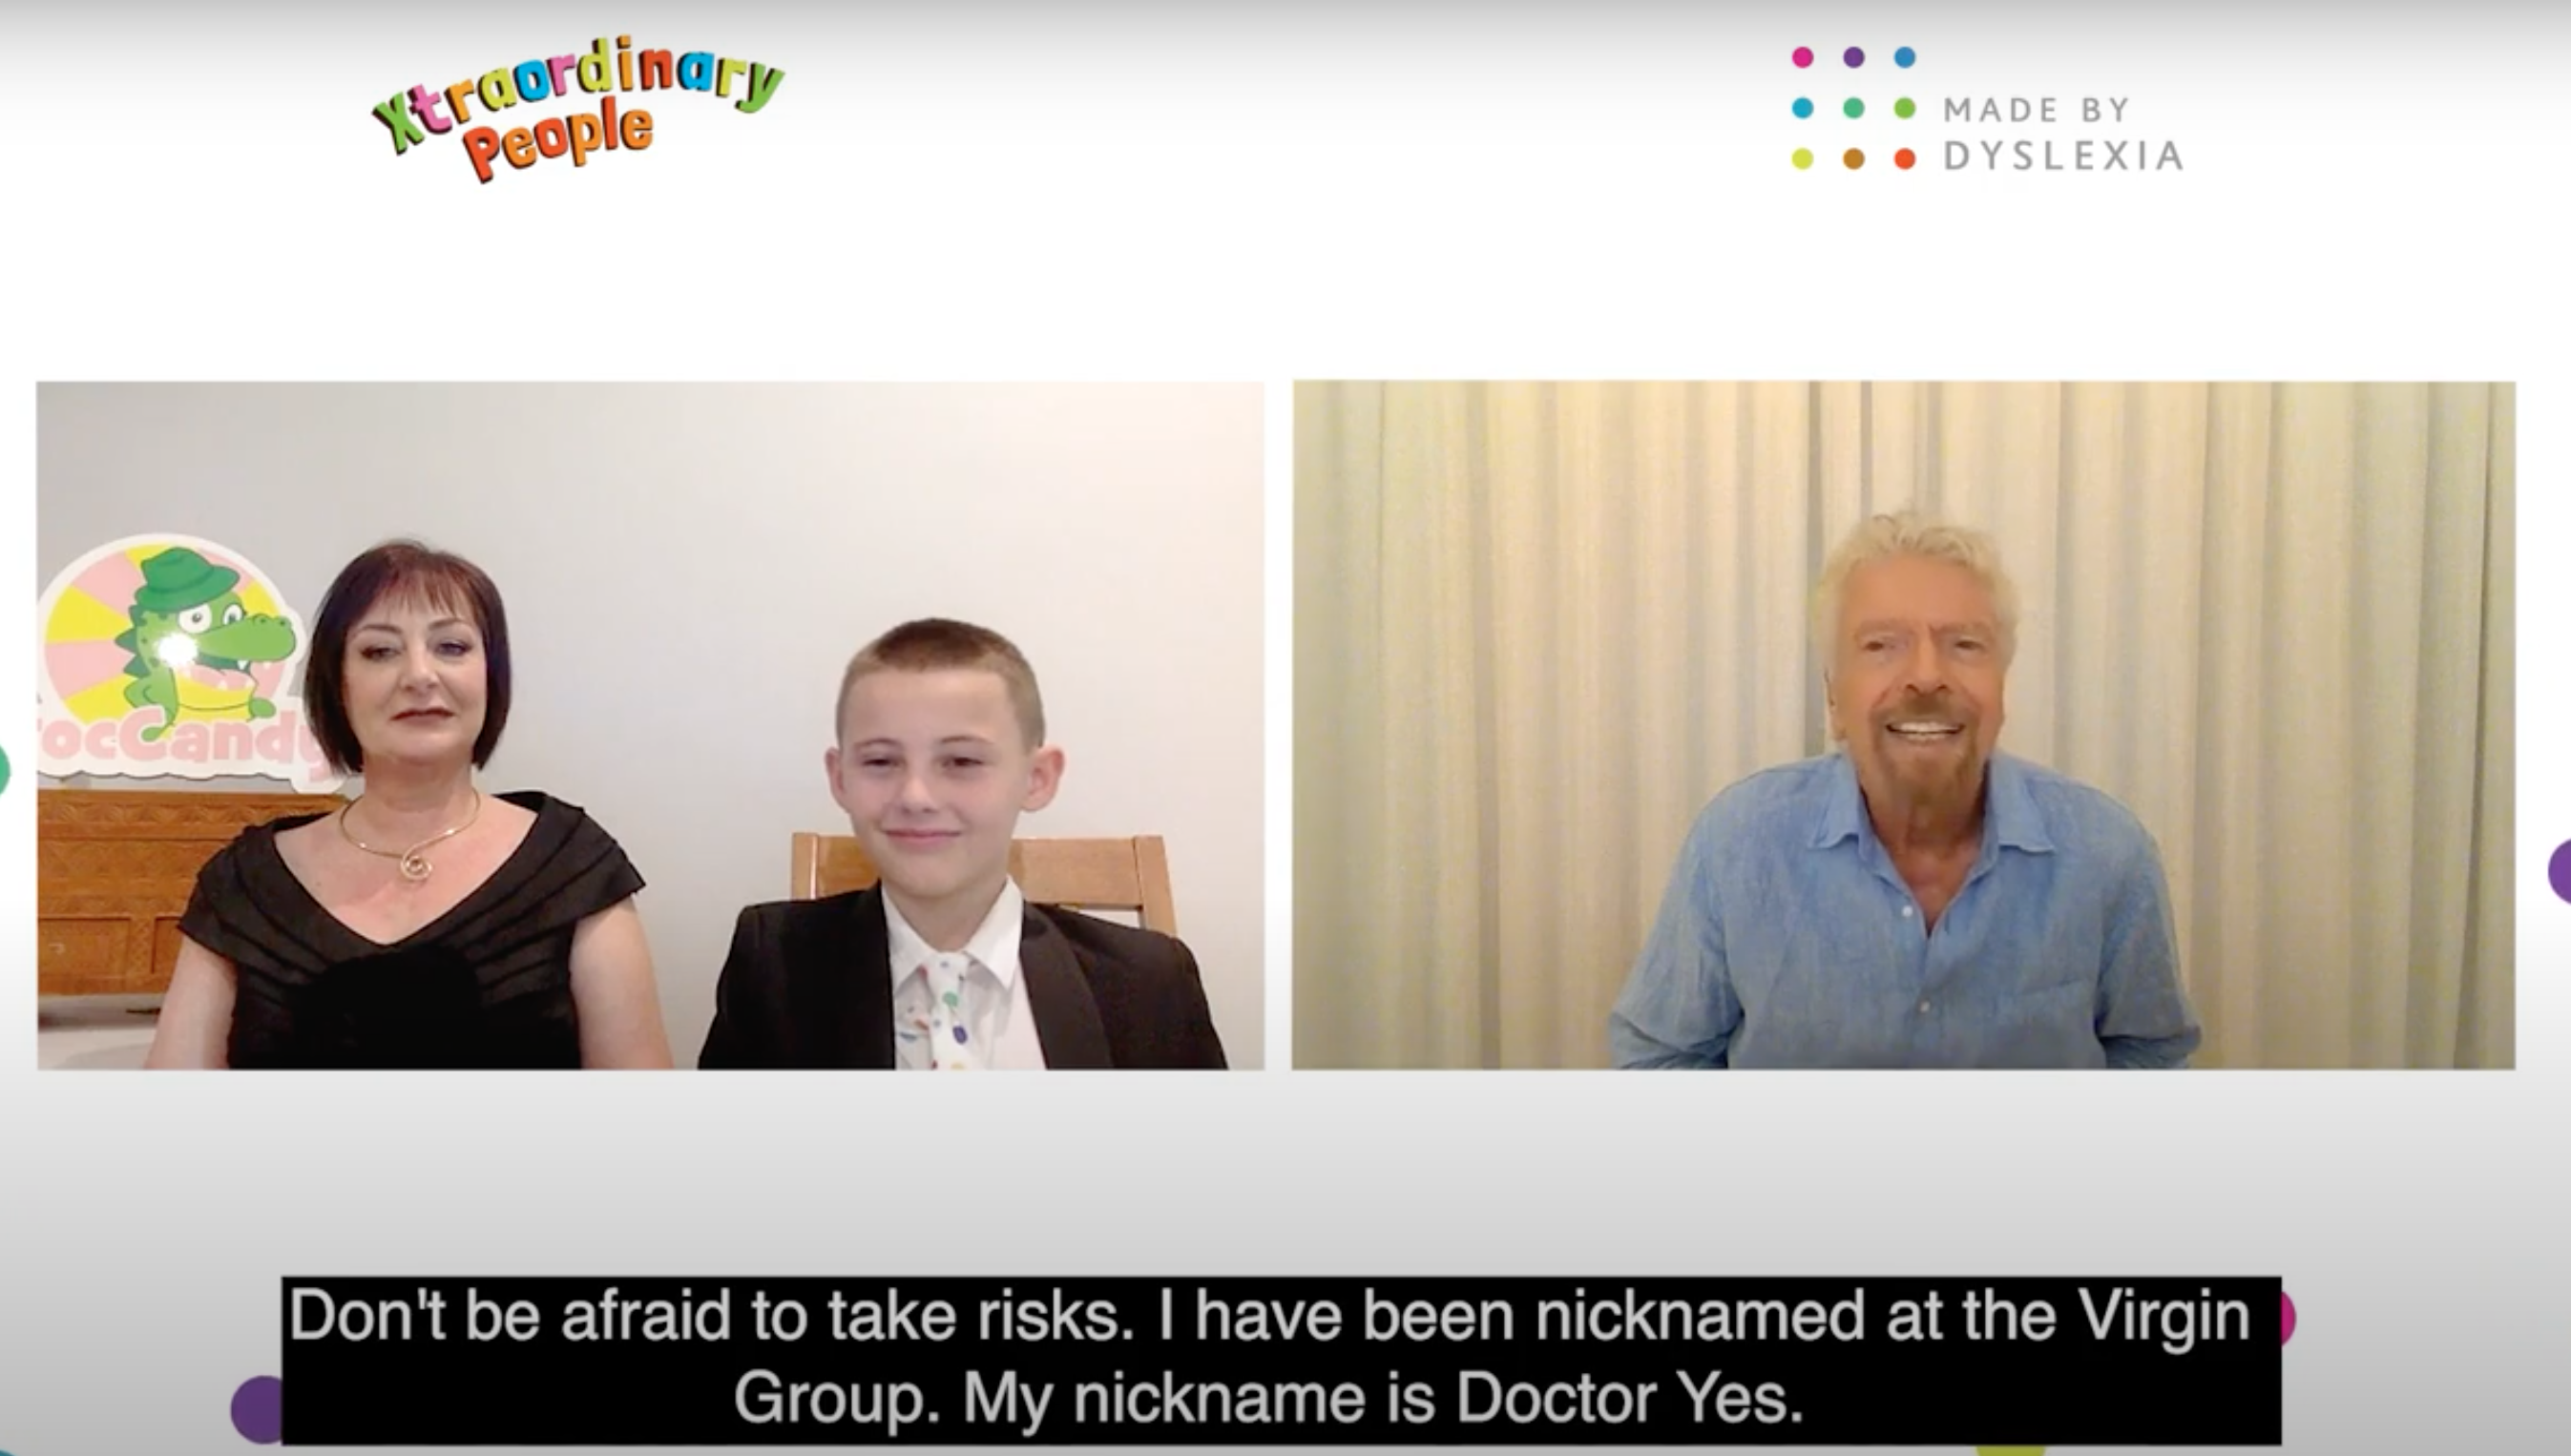 Richard Branson sharing a virtual mentoring session with a young, dyslexic entrepreneur